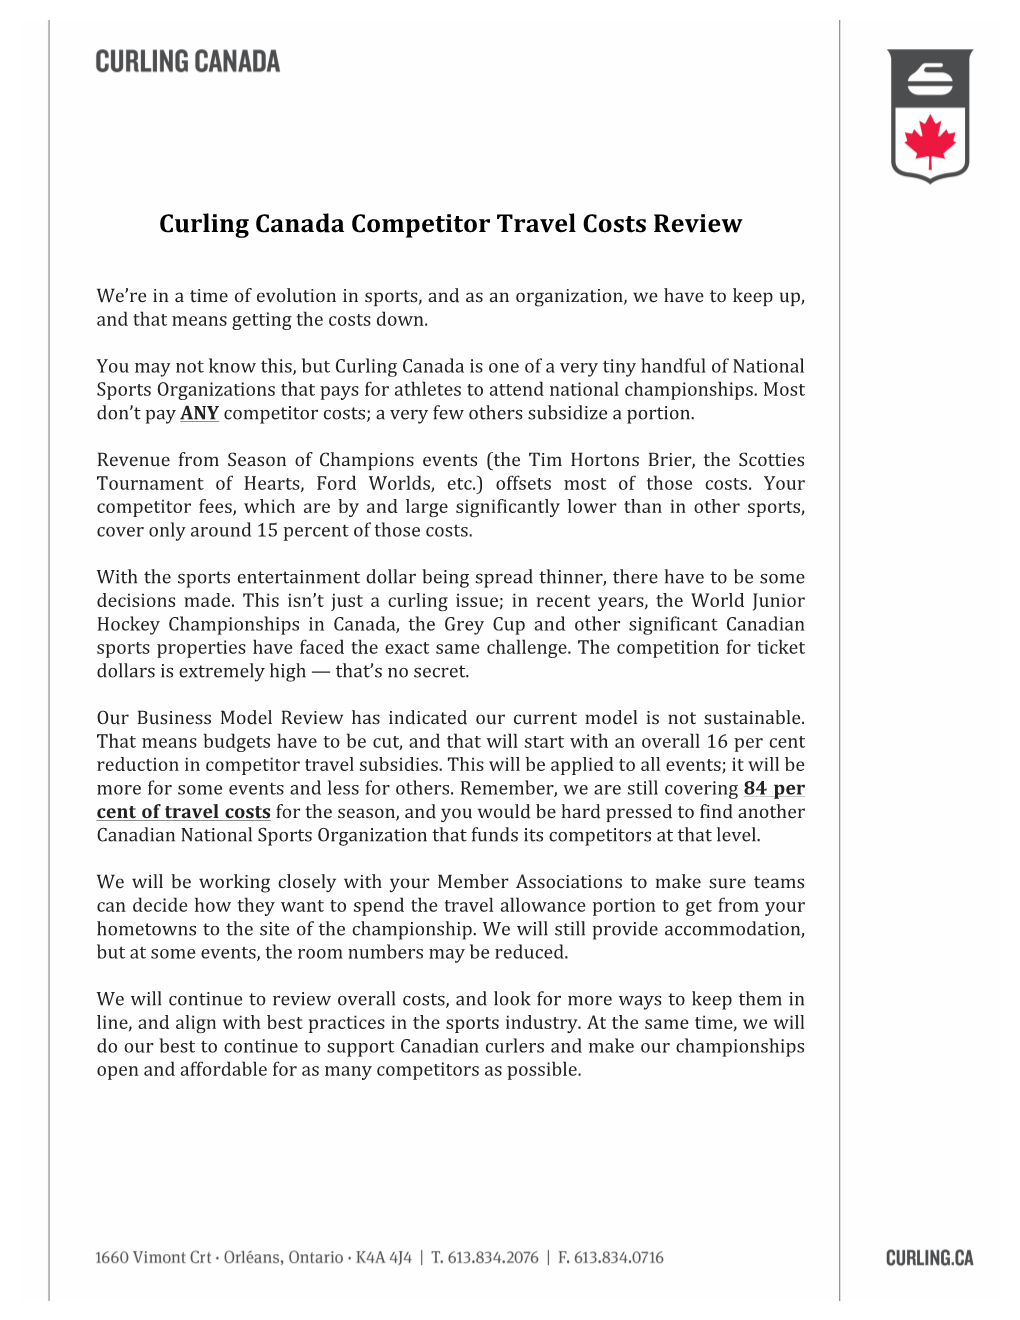 Curling Canada Competitor Travel Costs Review